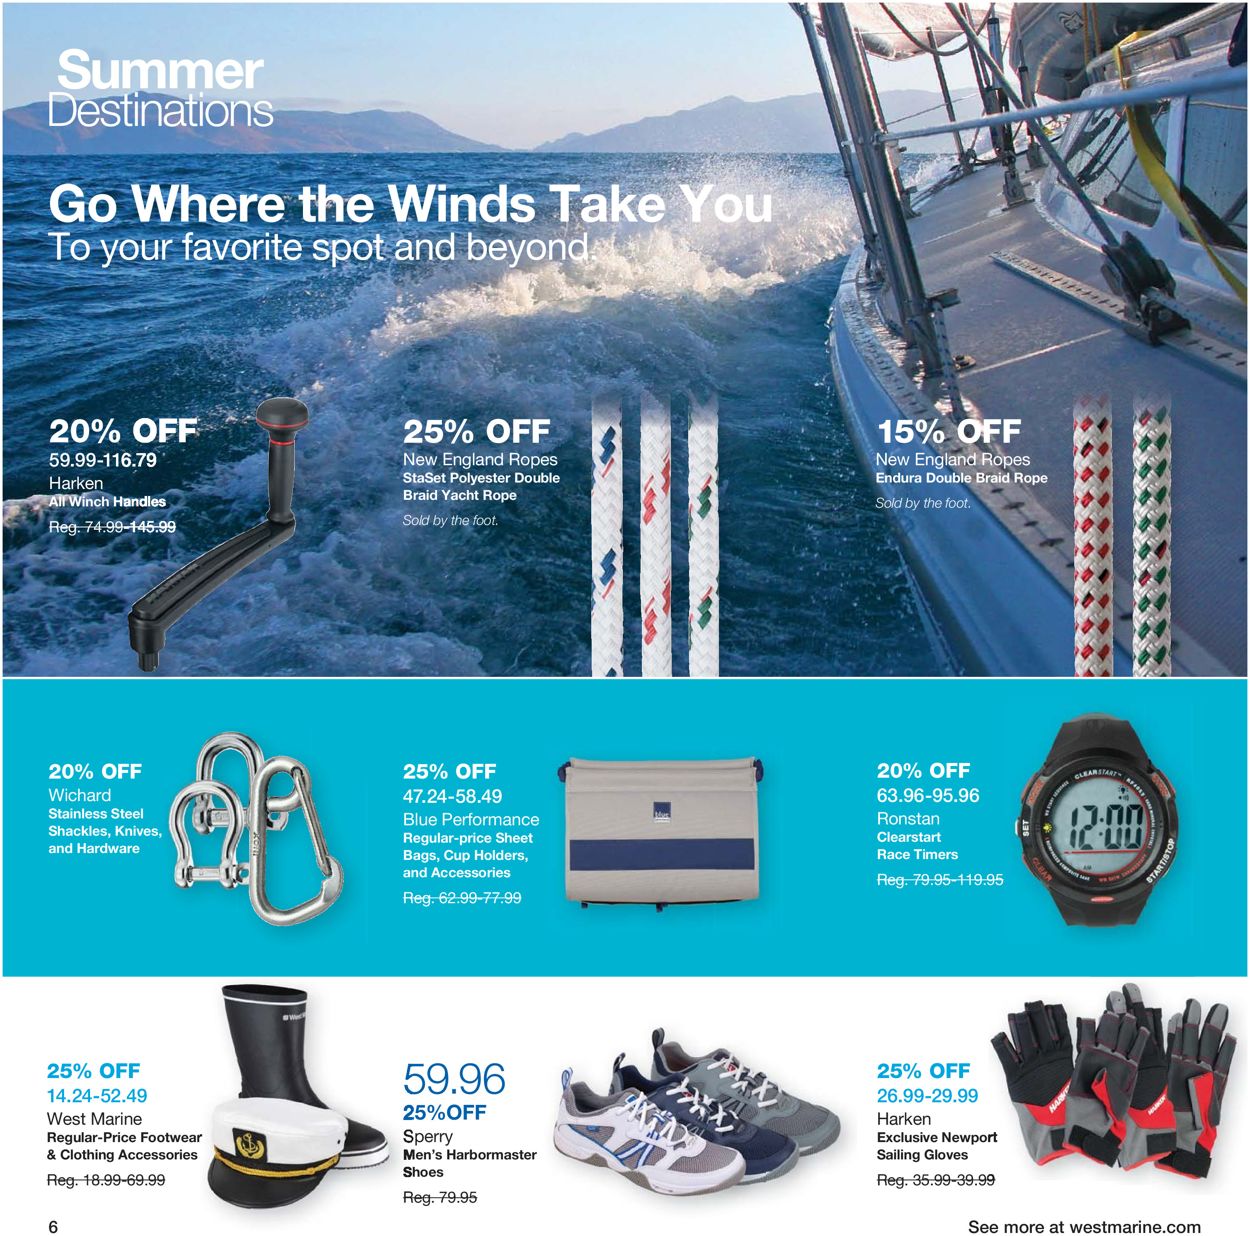 sperry harbormaster shoes